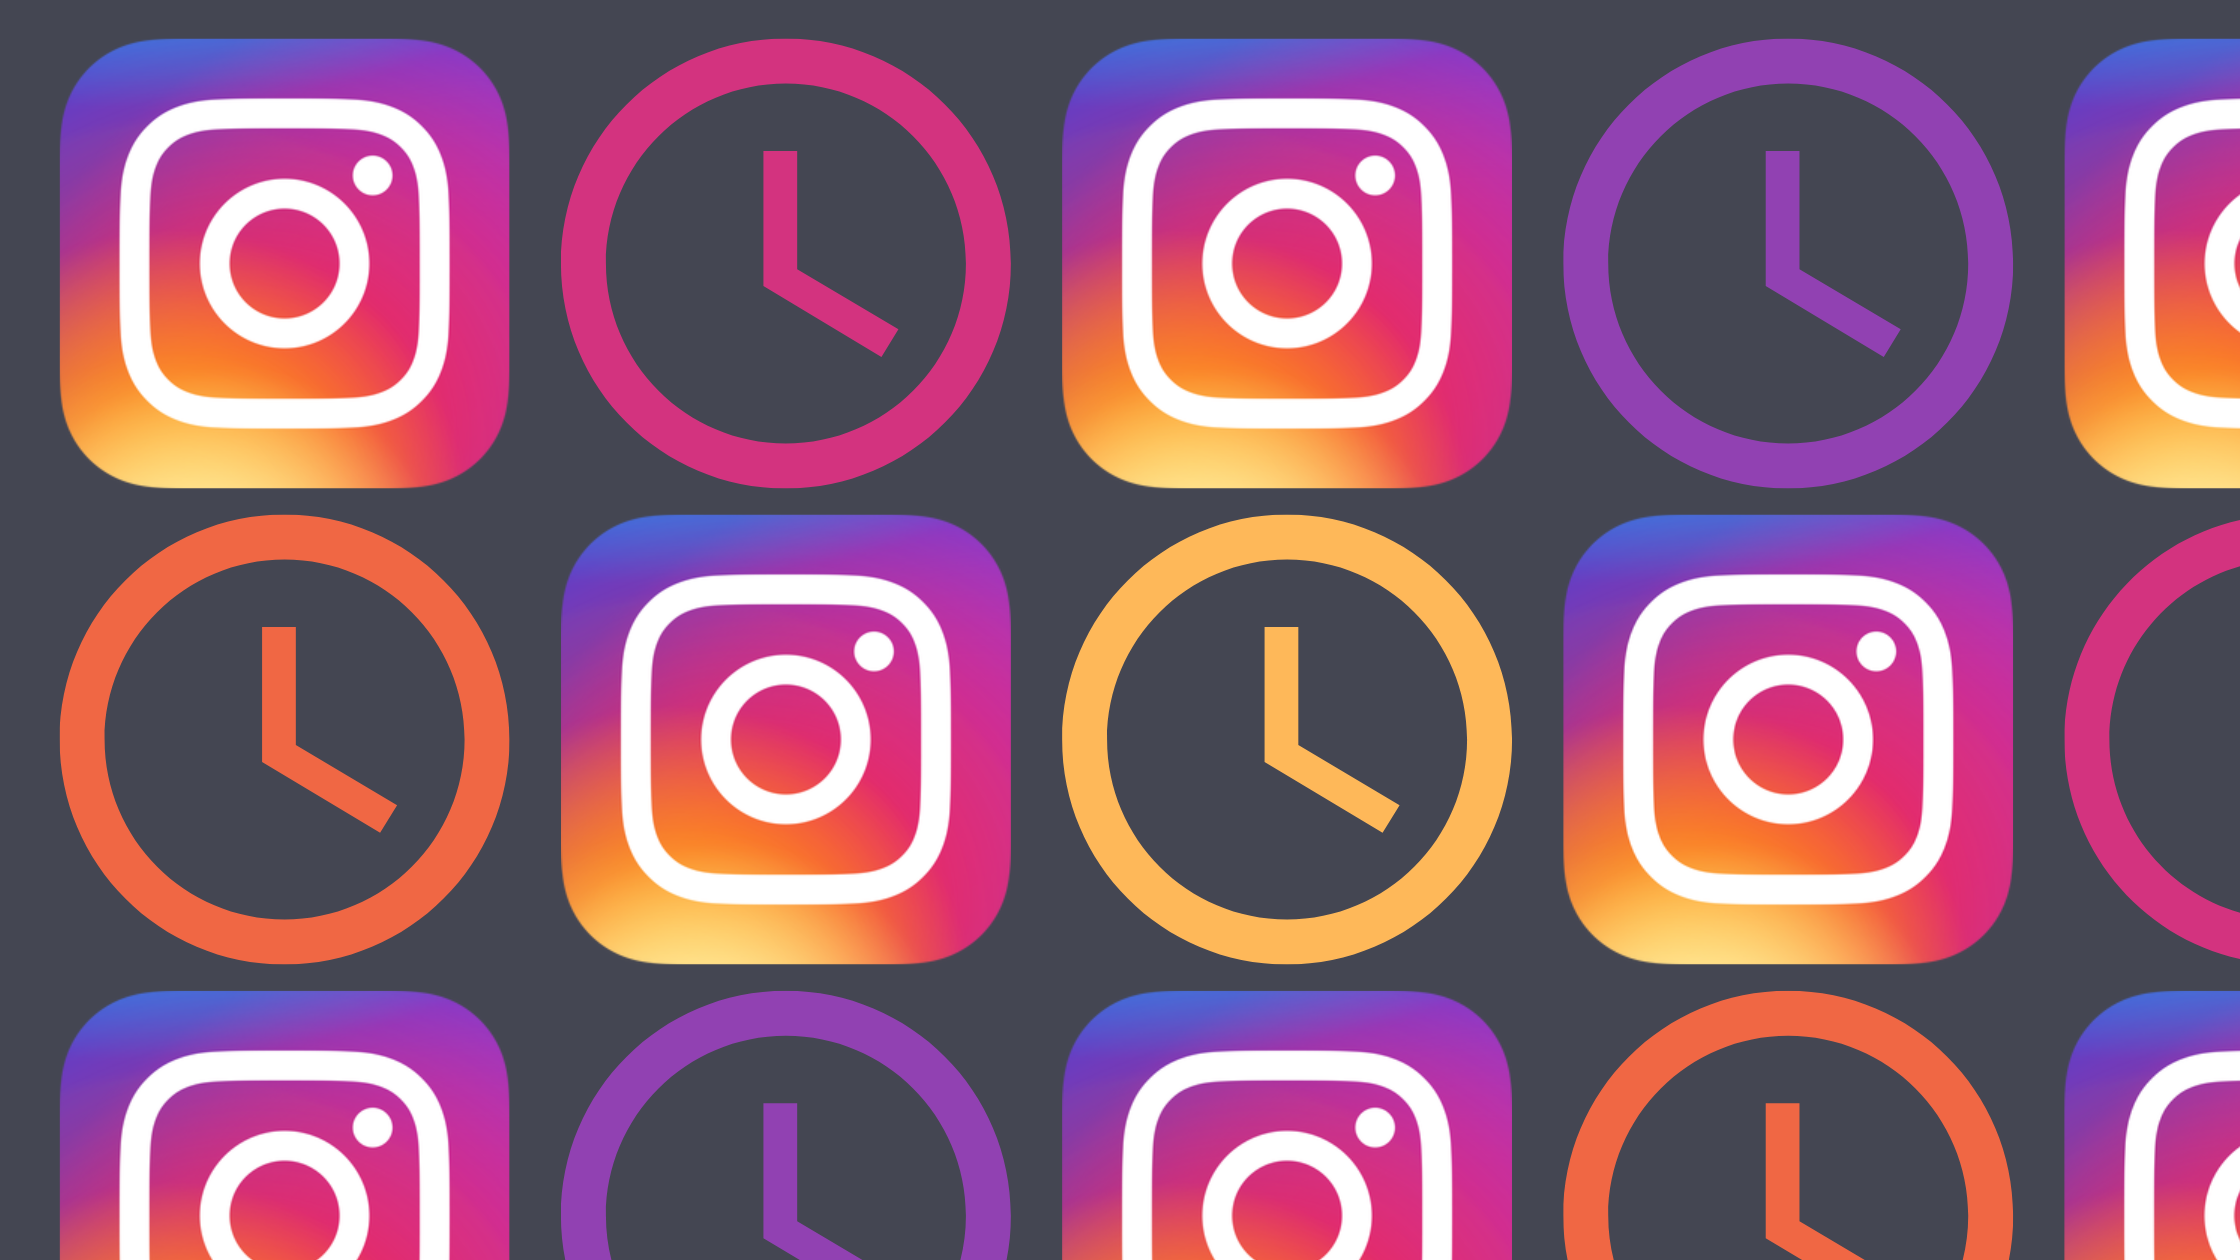 The Instagram logo and a clock icon in a repeating pattern